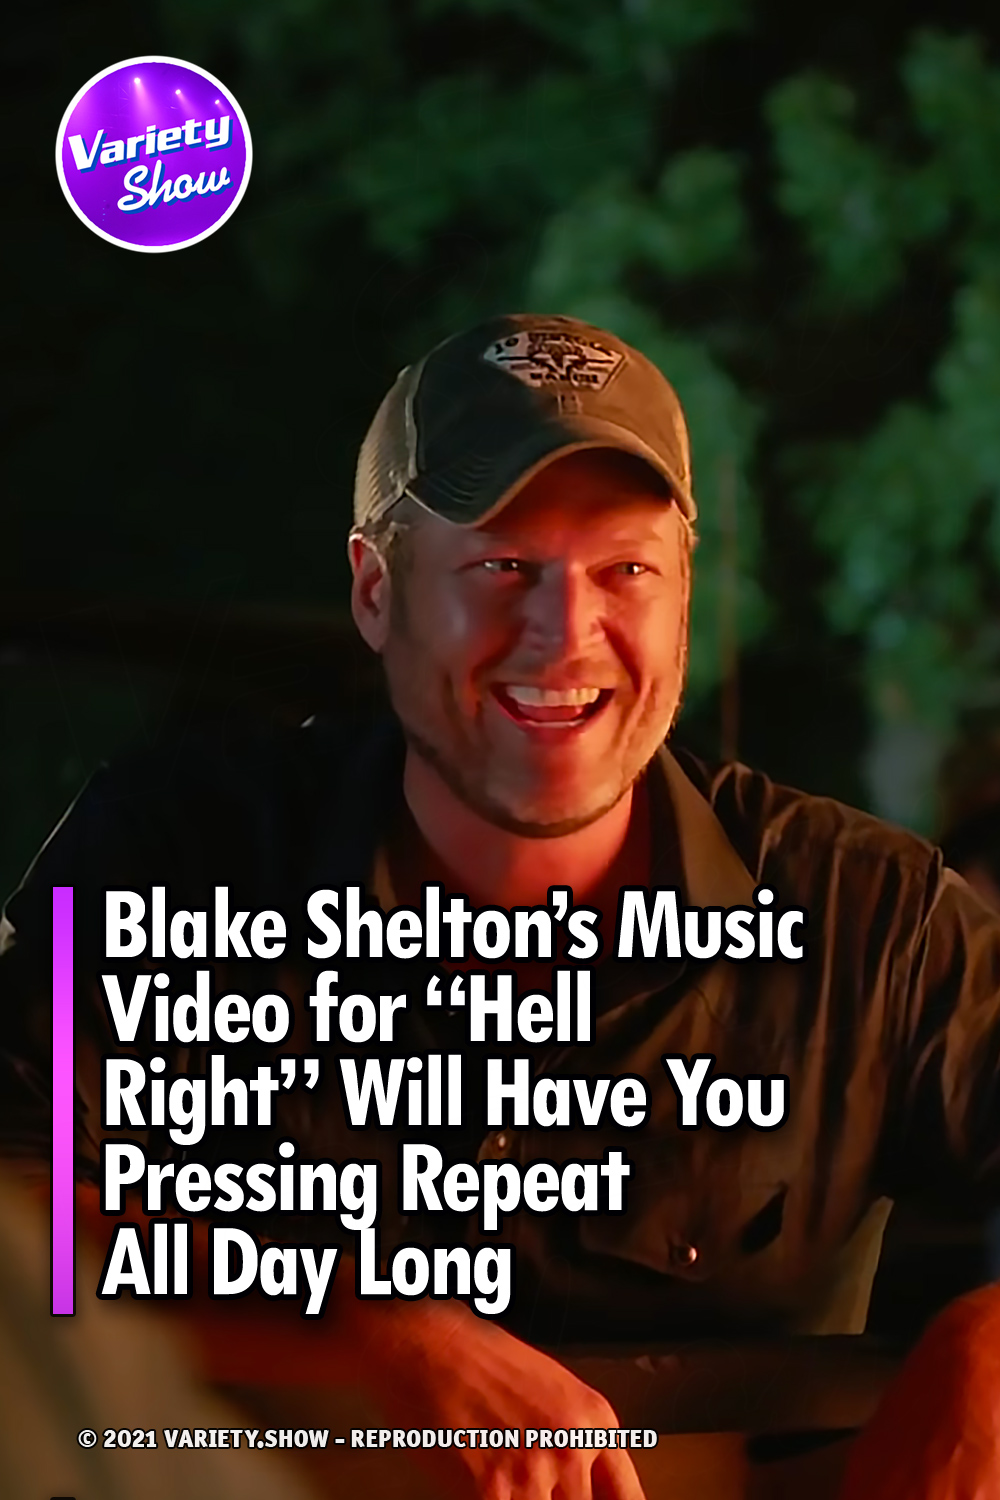 Blake Shelton’s Music Video for “Hell Right” Will Have You Pressing Repeat All Day Long